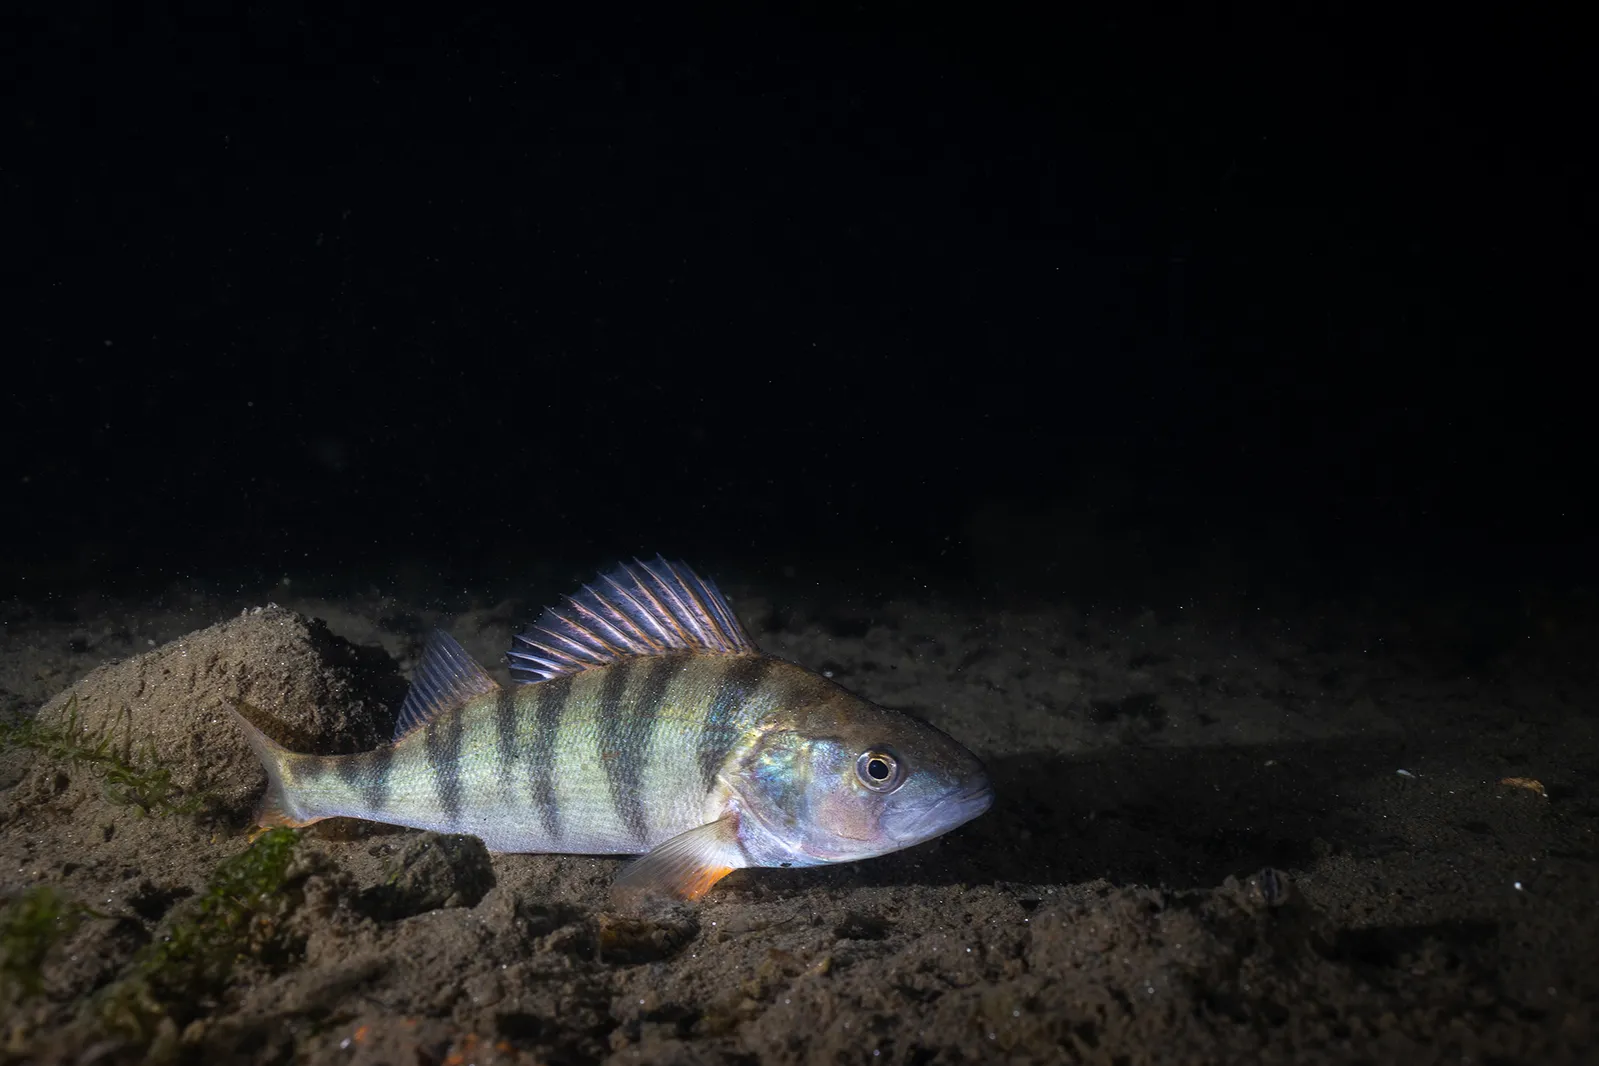 Italian Divers Revive Centuries-Old Tradition to Help Save European Perch, Innovation